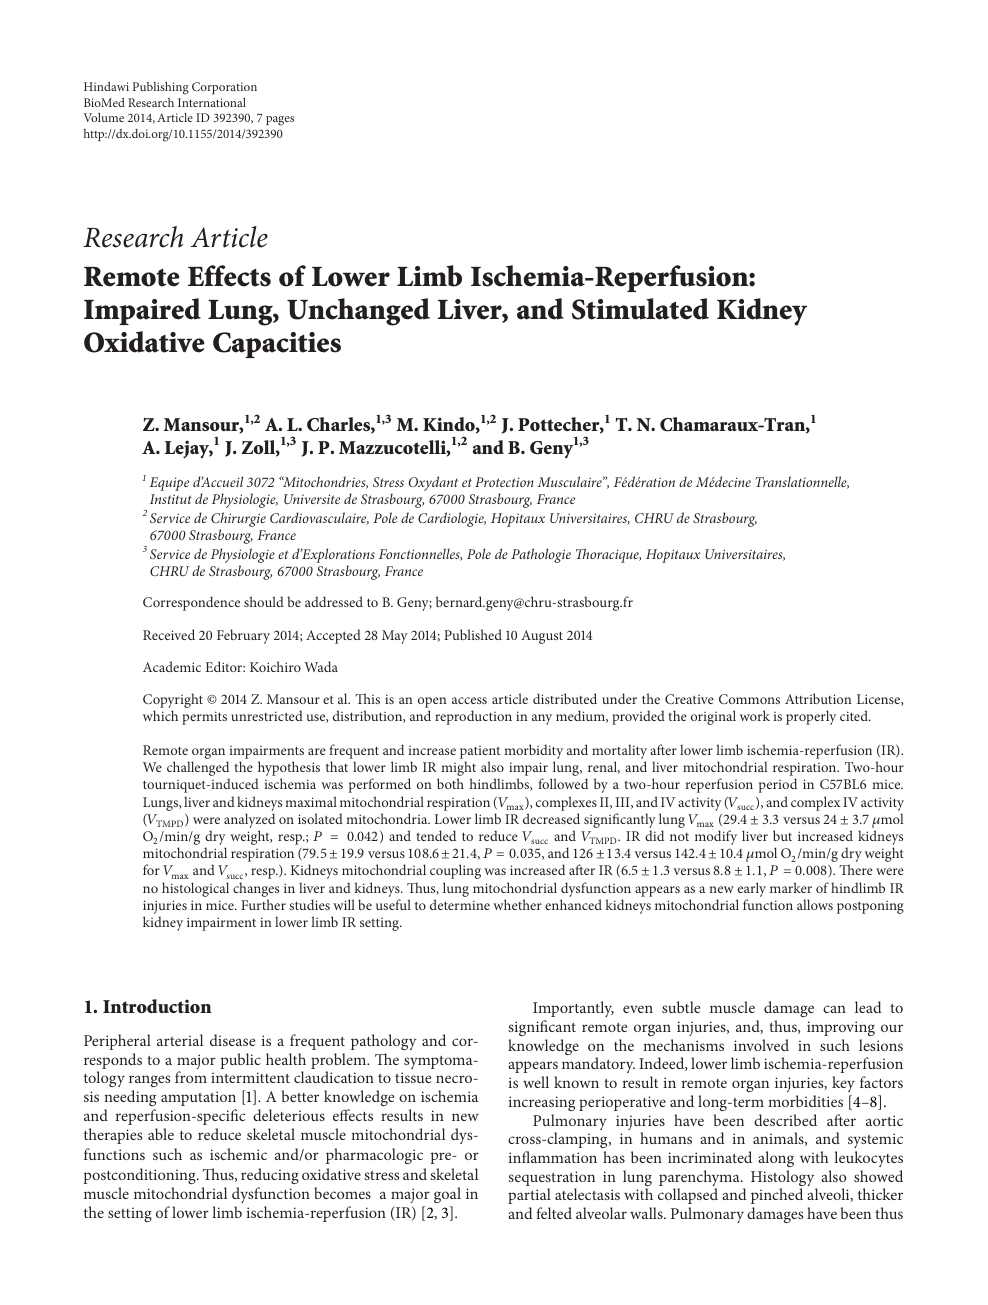 Remote Effects Of Lower Limb Ischemia Reperfusion Impaired Lung Unchanged Liver And Stimulated Kidney Oxidative Capacities Topic Of Research Paper In Medical Engineering Download Scholarly Article Pdf And Read For Free On